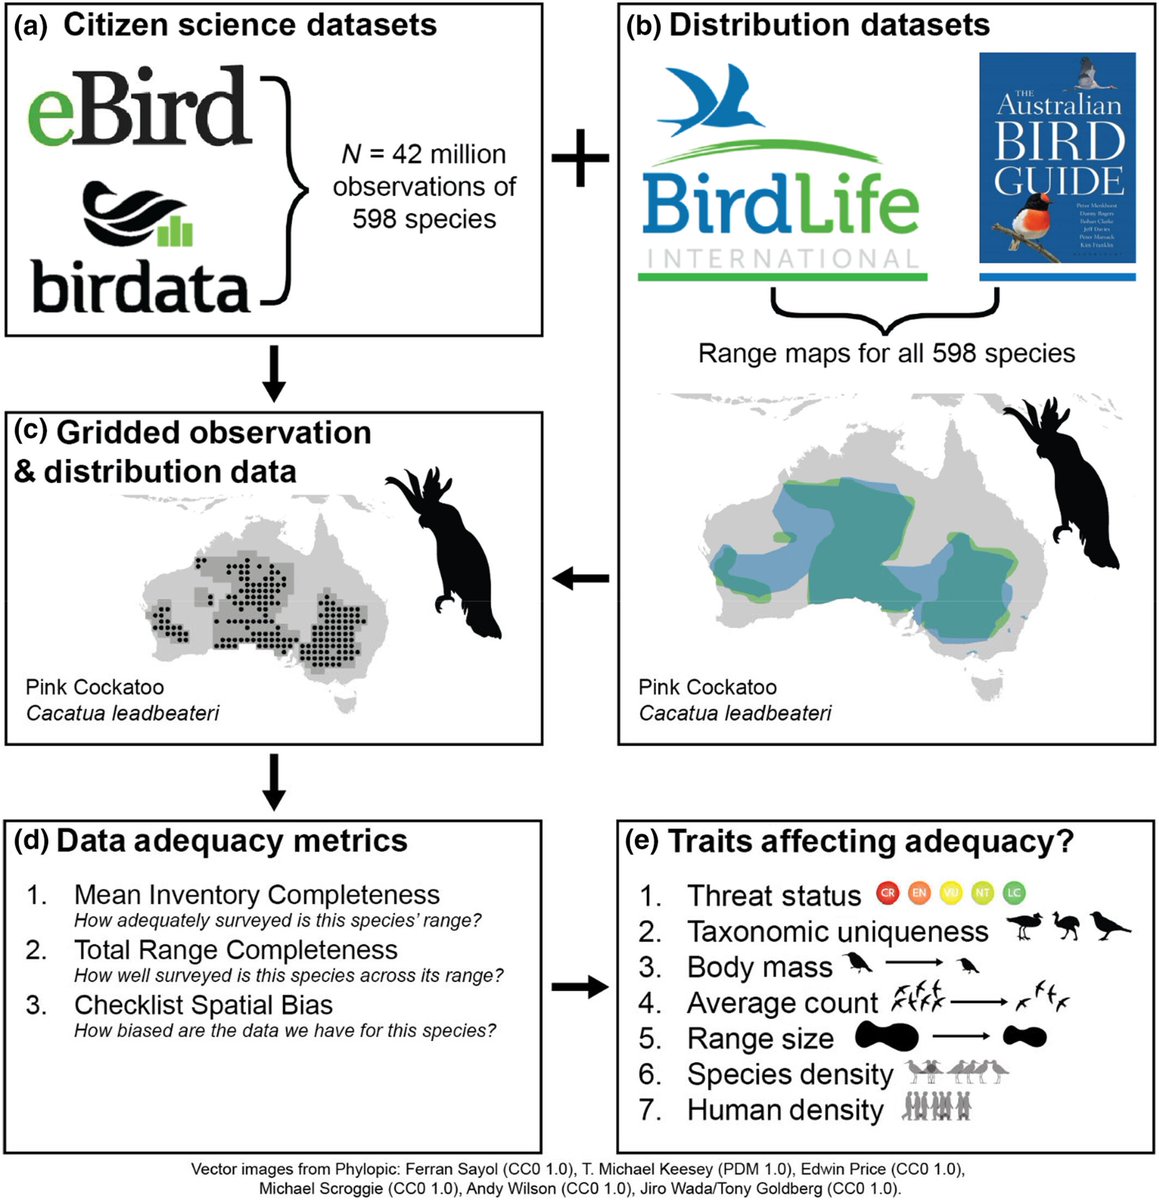 New #CitizenScience paper out today with @cyclonewatson @callaghanct and colleagues: Can we quantify how adequate citizen science data are? We develop metrics to answer this, and then explore adequacy in @Team_eBird & @BirdlifeOz data across Australia. onlinelibrary.wiley.com/doi/10.1002/ec…